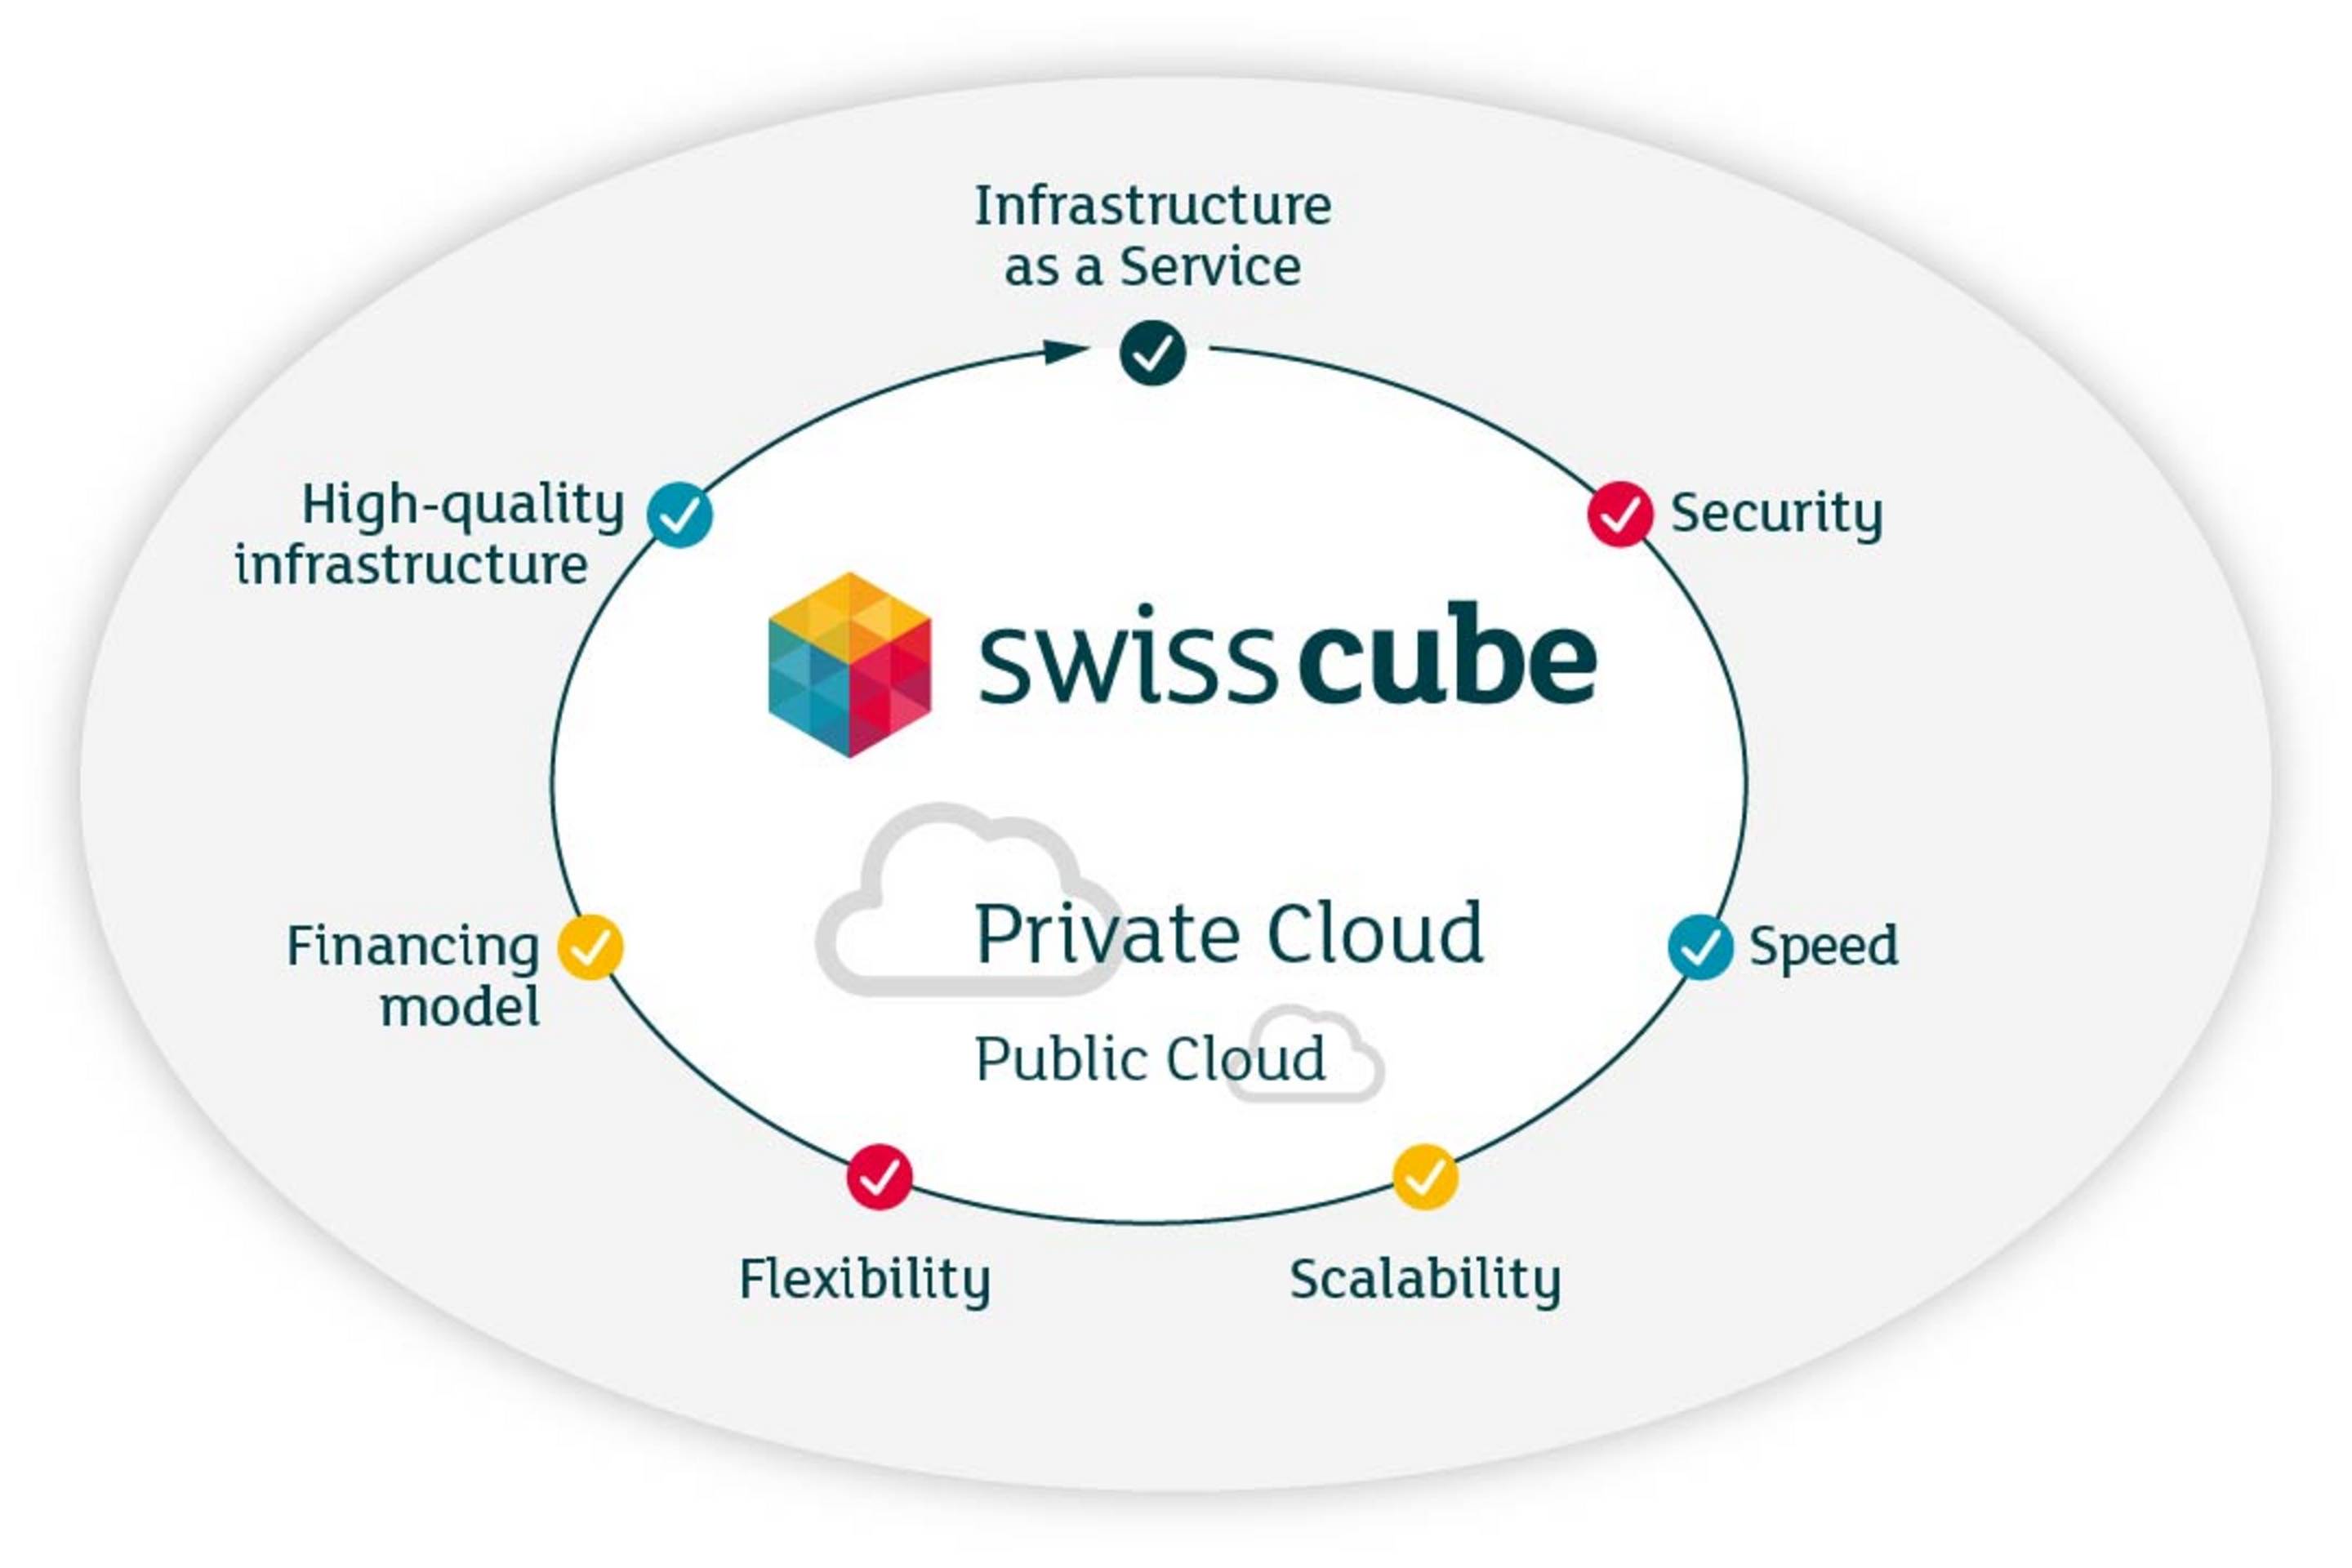 Swiss Cube graphic with the advantages of the IaaS solution: security, speed, scalability, flexibility, financing model, high-quality infrastructure.